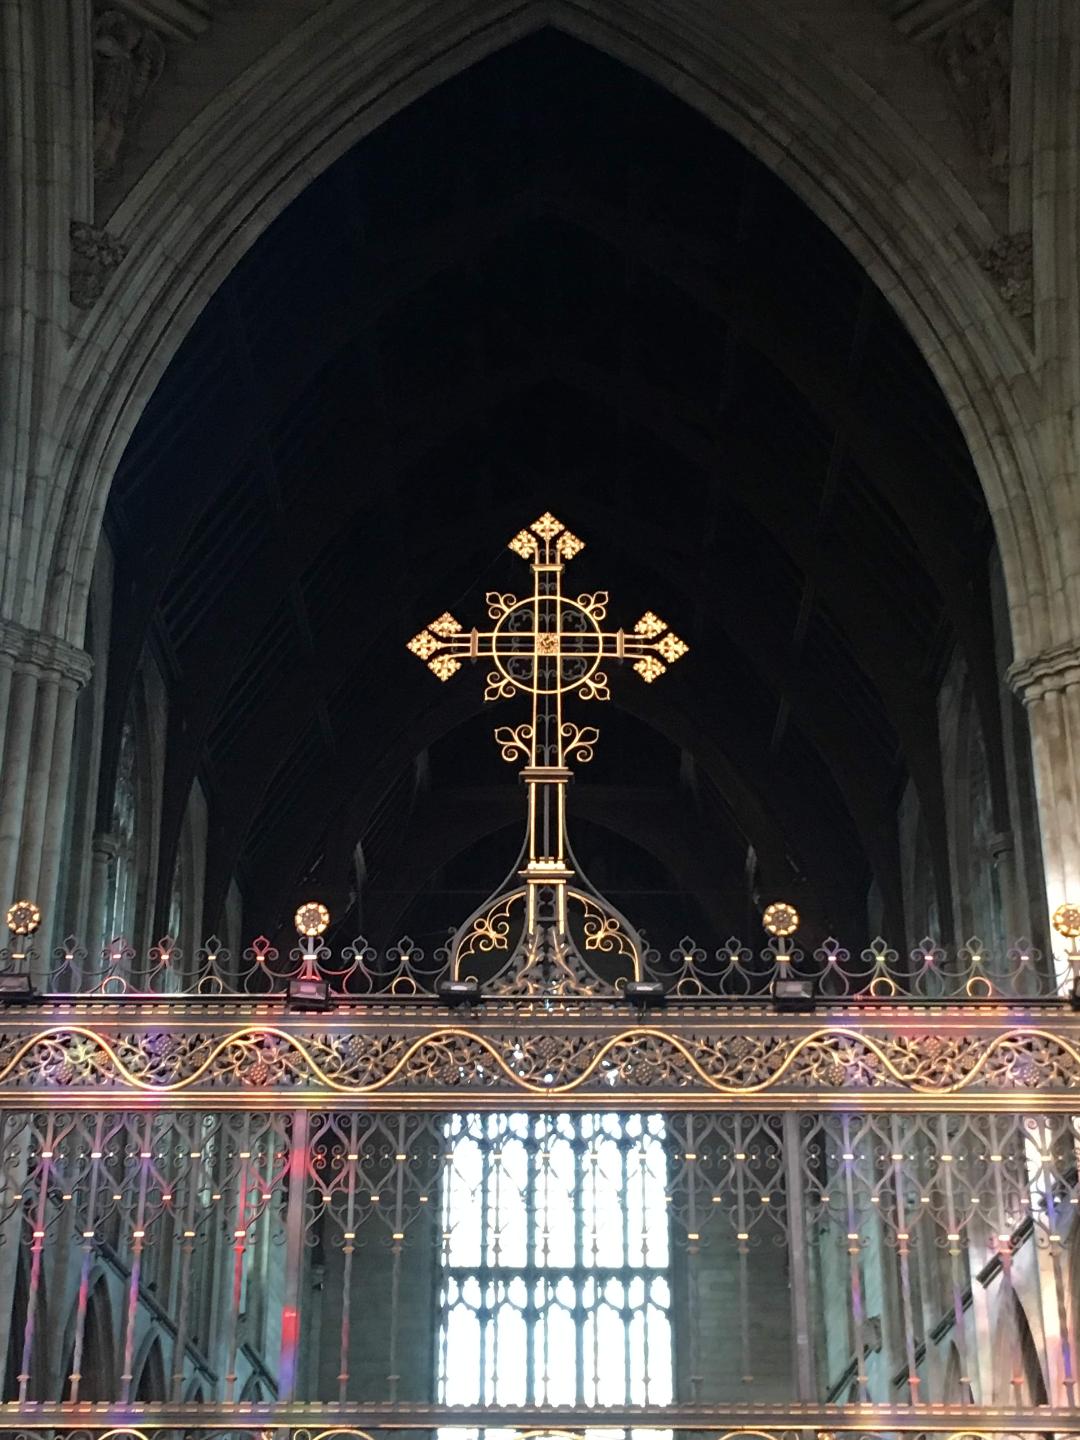 The rood screen cross looking towards the west window